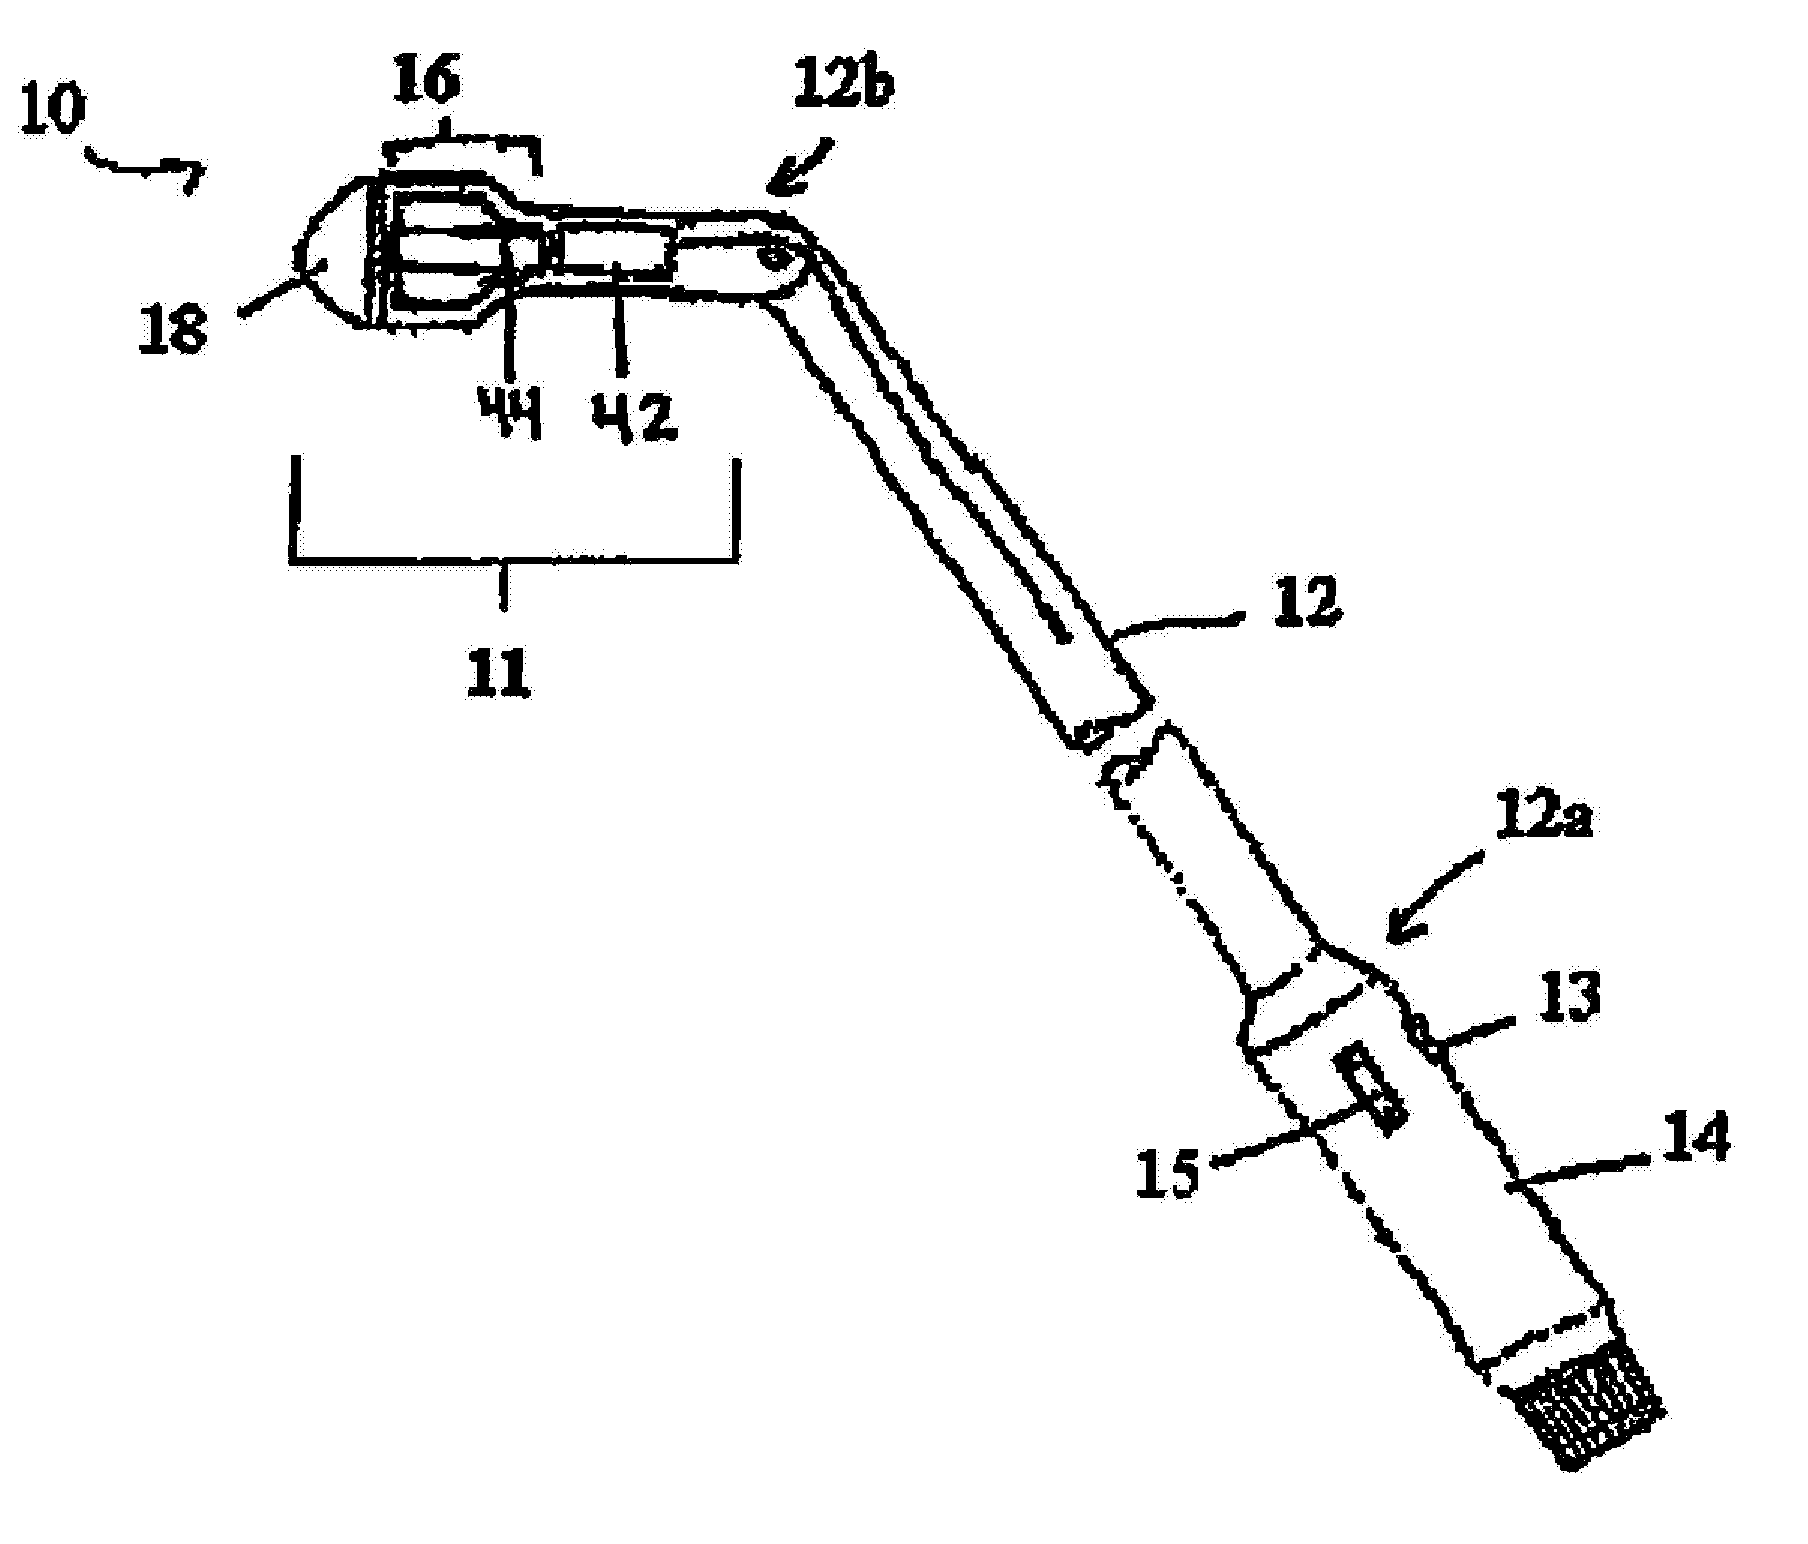 Electroactive polymer-based actuation mechanism for circular stapler